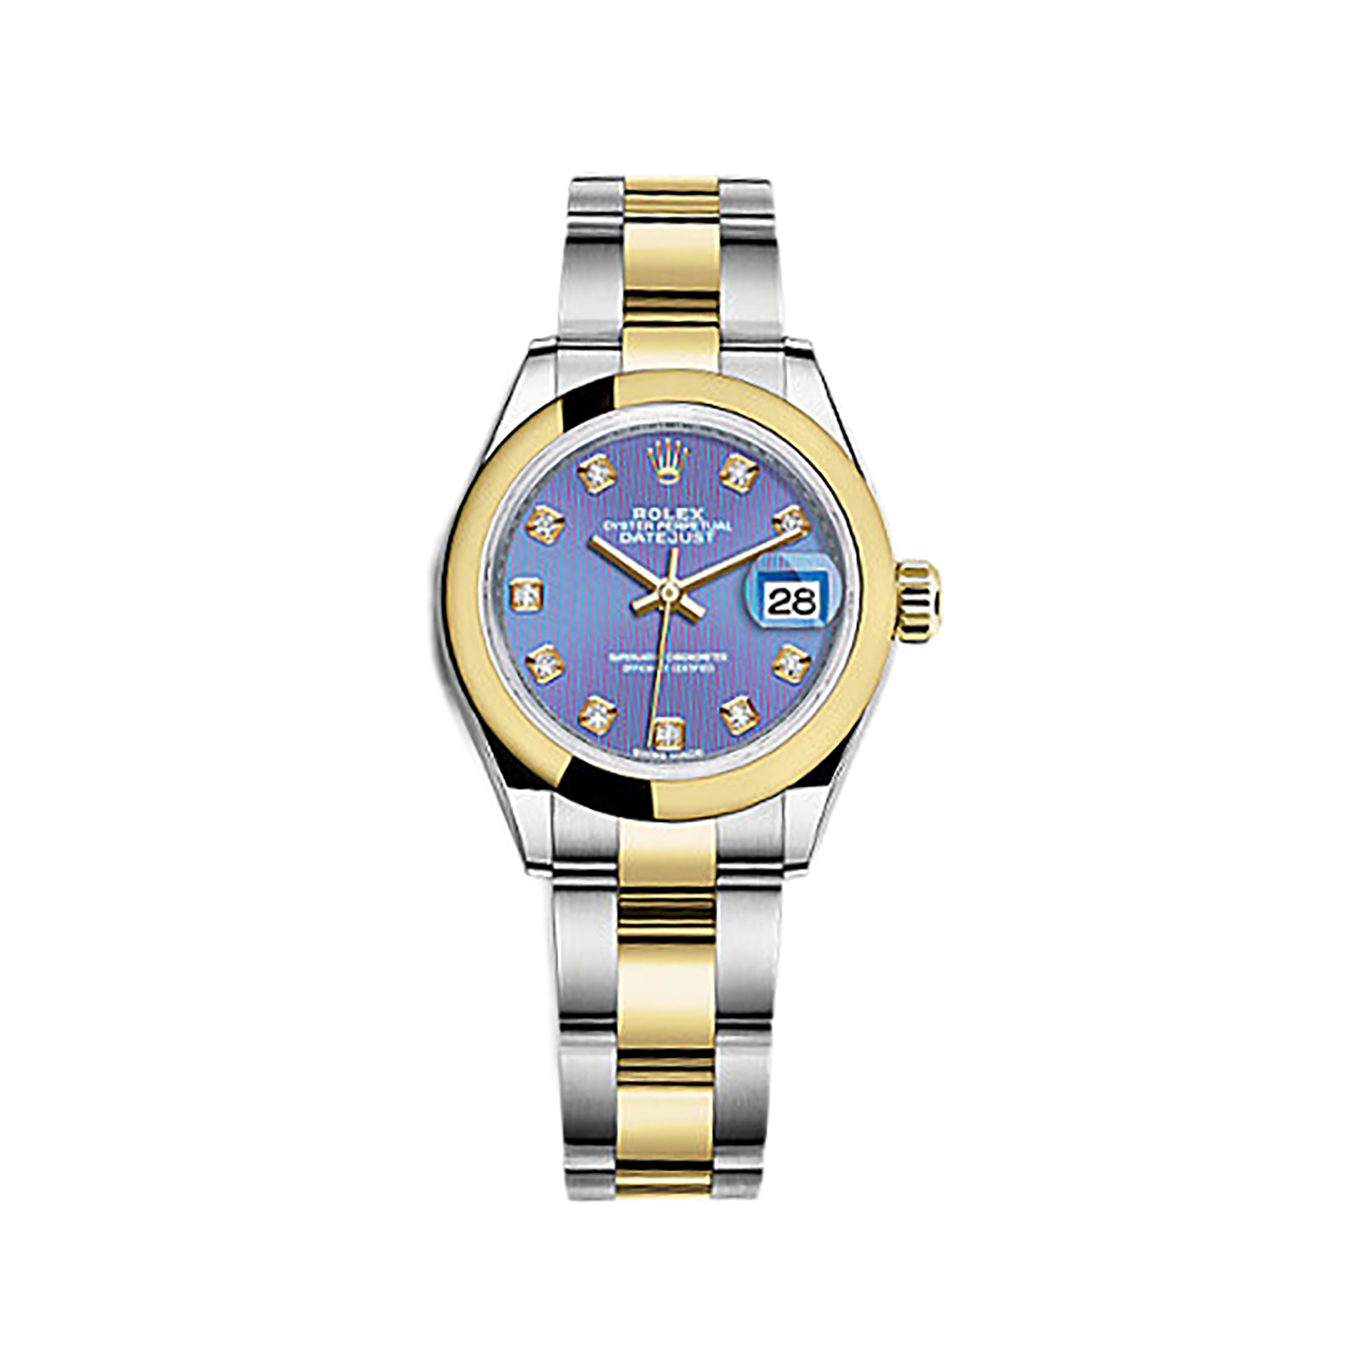 Lady-Datejust 28 279163 Gold & Stainless Steel Watch (Lavender Set with Diamonds)